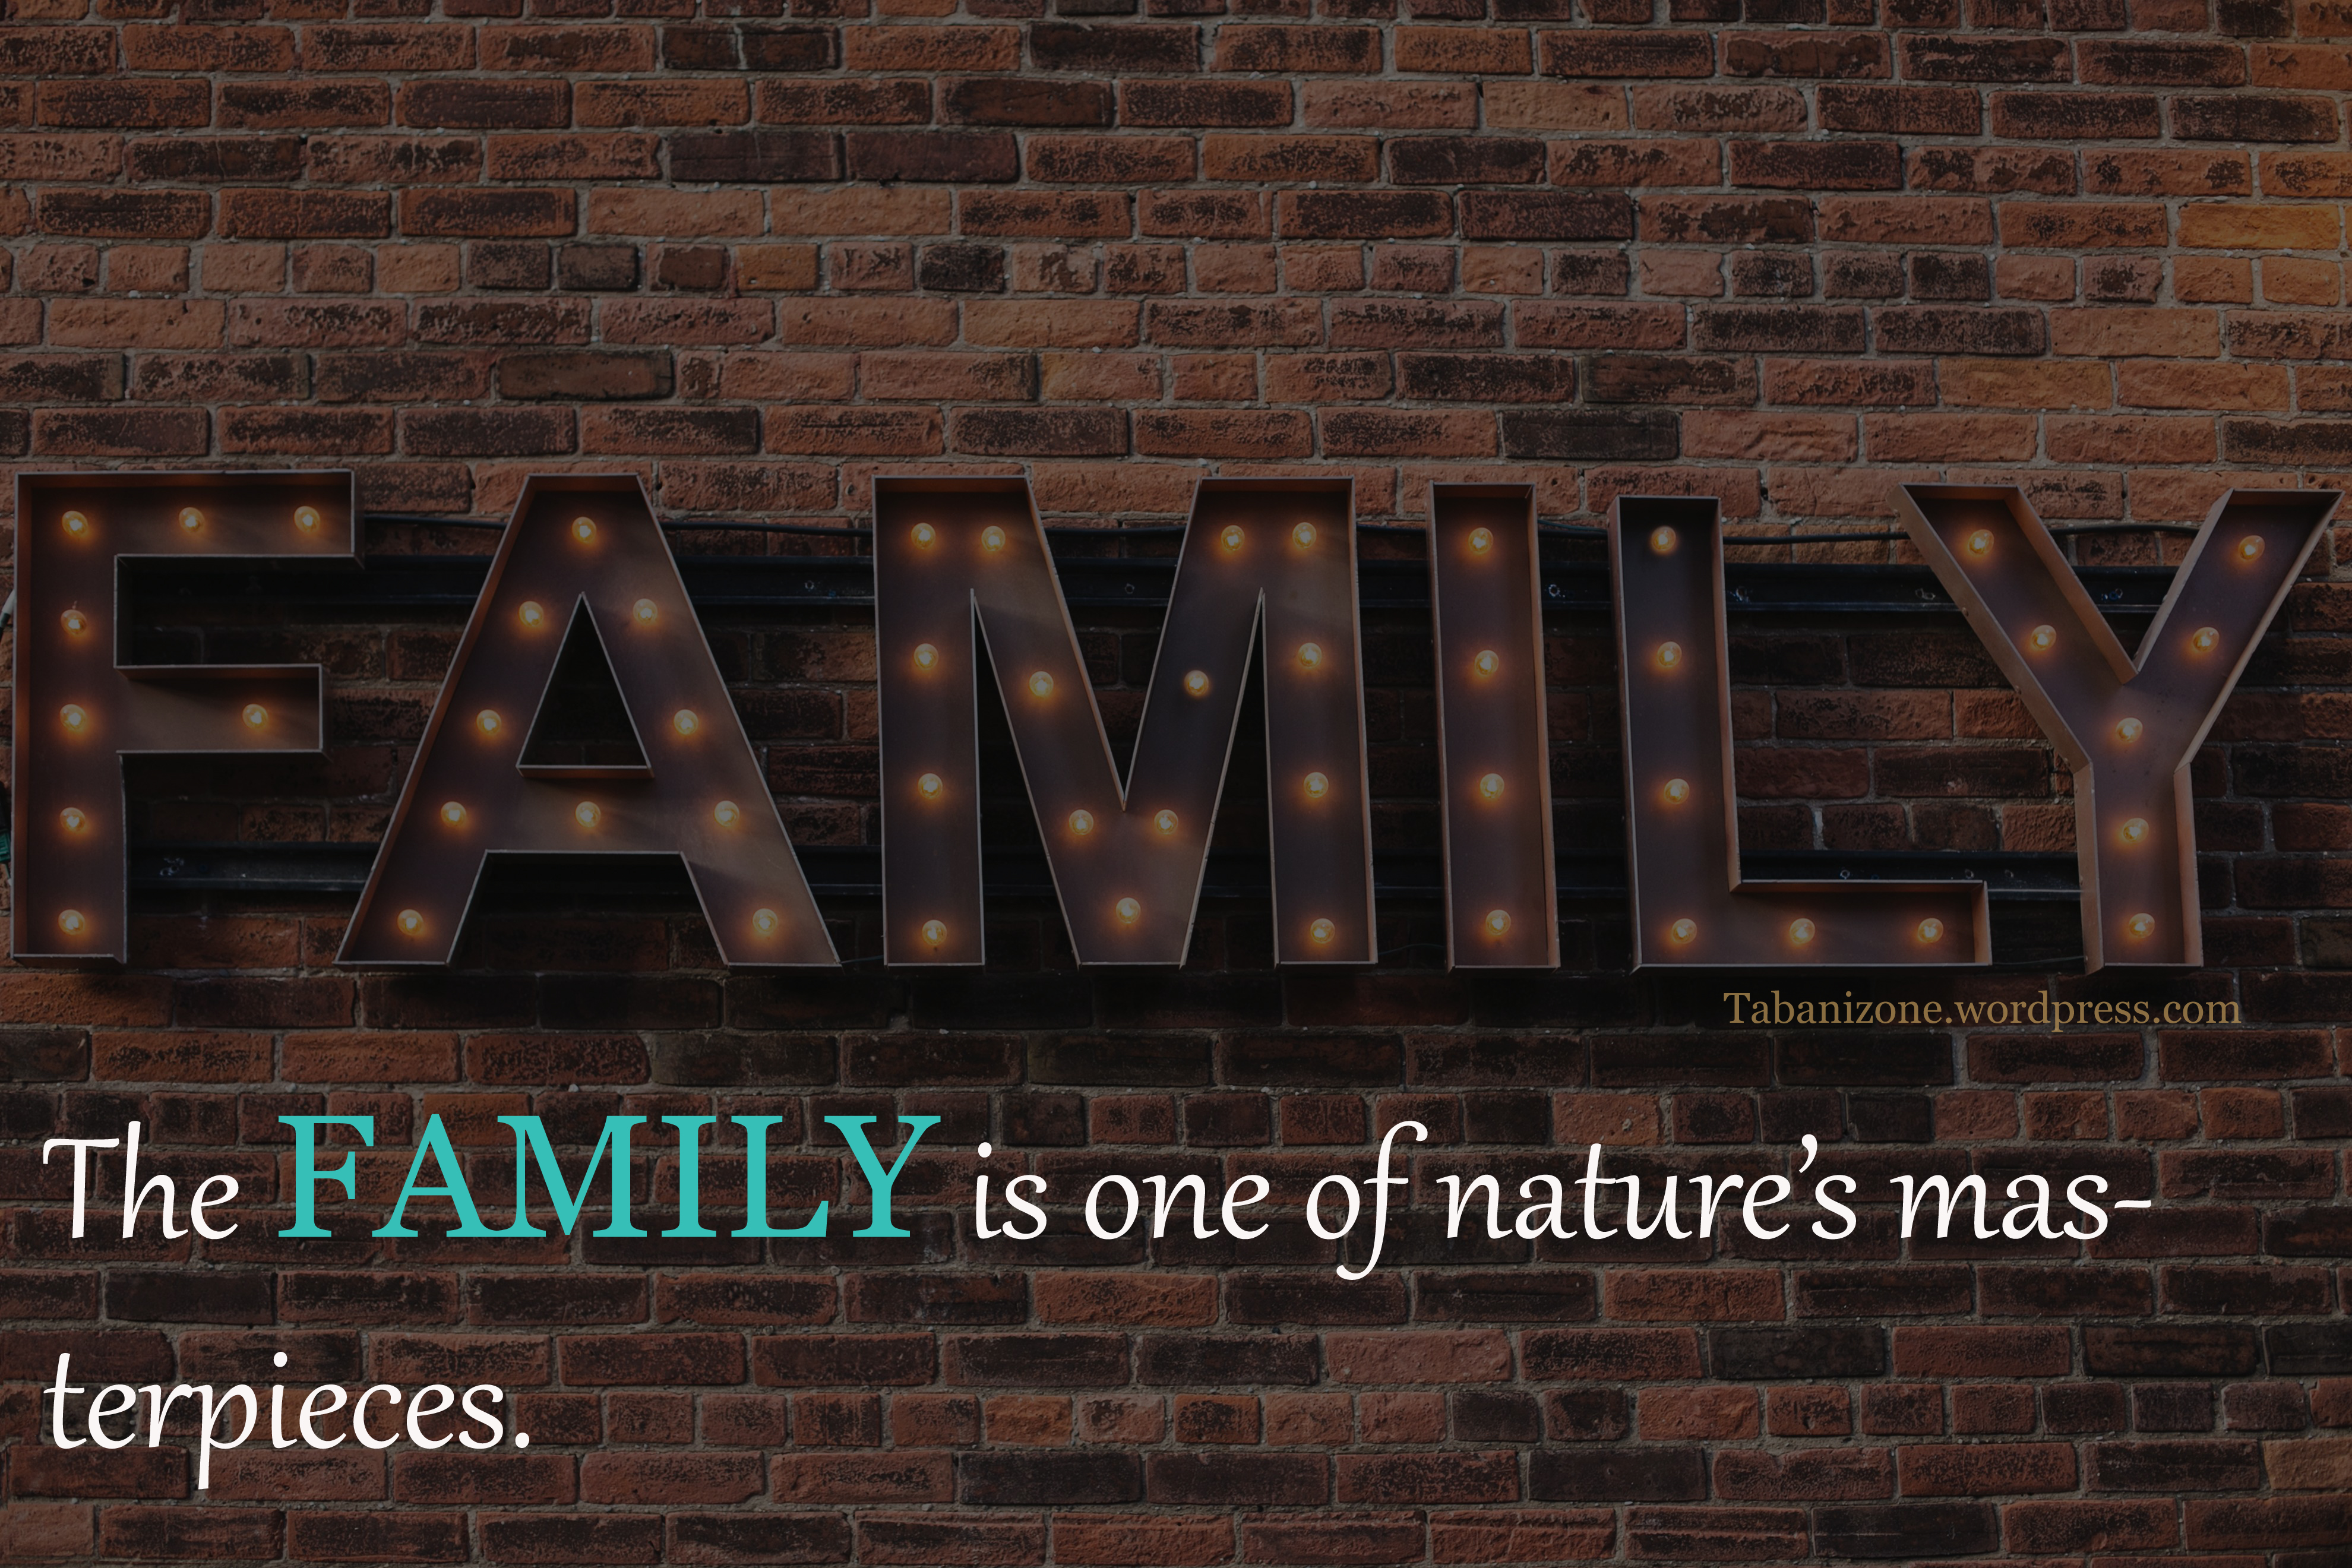 family-sign-with-lights_4460x4460 copy